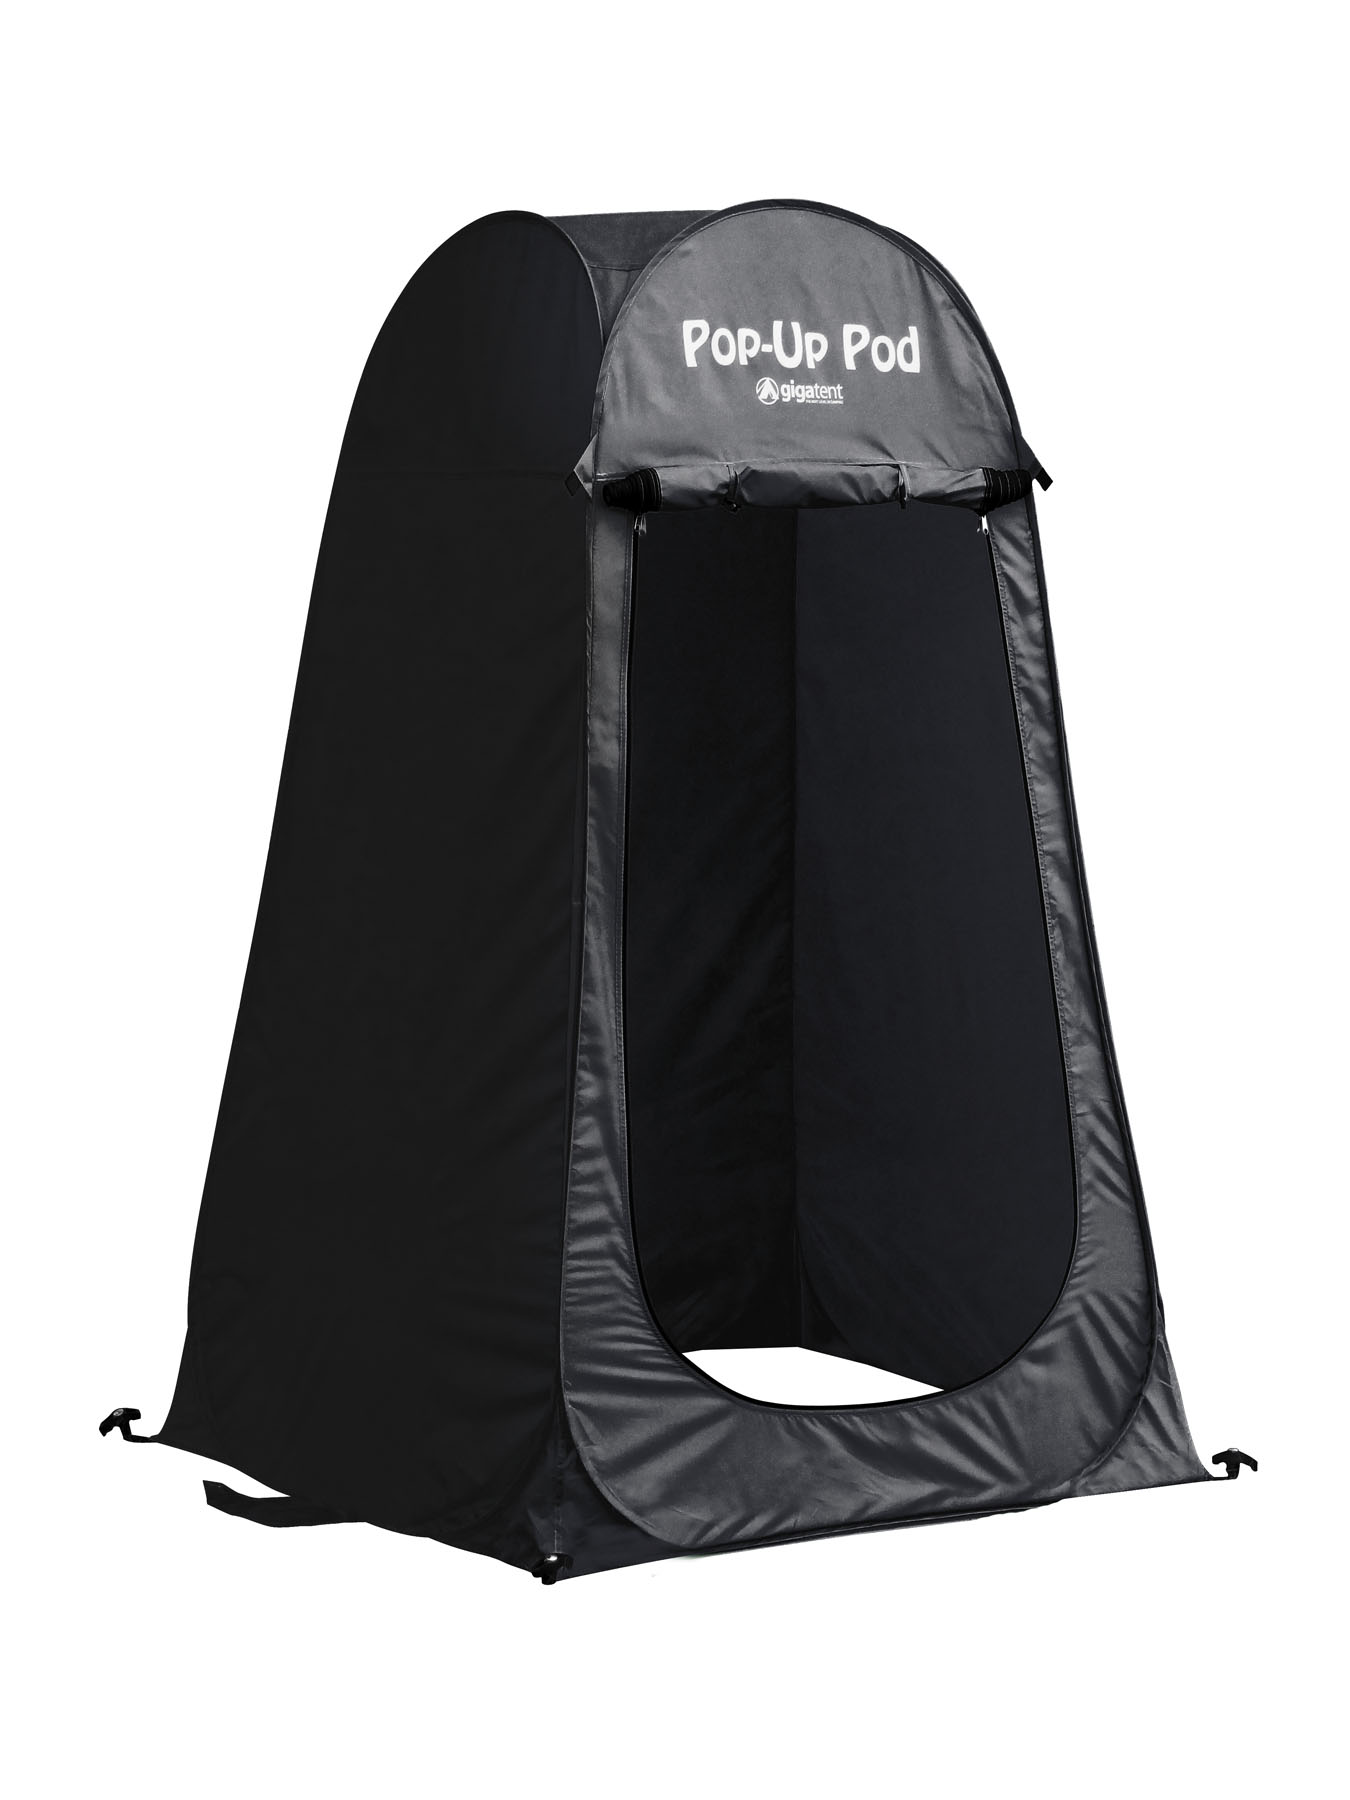 GigaTent 1-Person Pop Up Privacy Tent for Camping Changing Room, Portable Shower Station (Black) - image 5 of 7